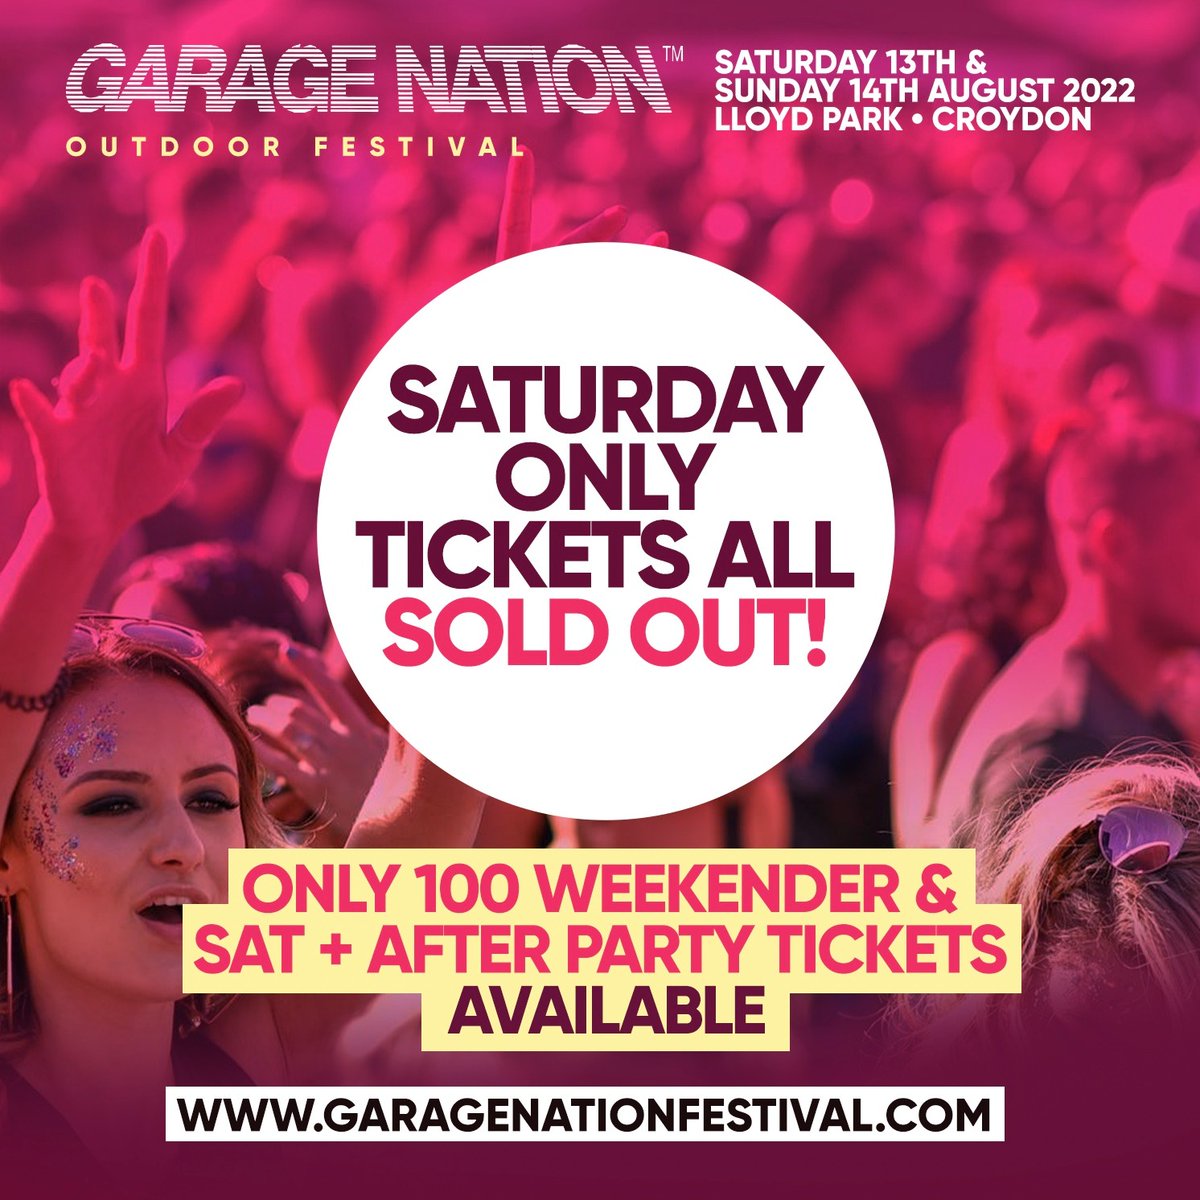 Garage Nation Festival Saturday Only Tickets have SOLD OUT! Less than 1400 Sunday remain > garagenationfestival.com >> Sat 13th & Sun 14th Aug at Lloyd Park Croydon with @MCVersatile